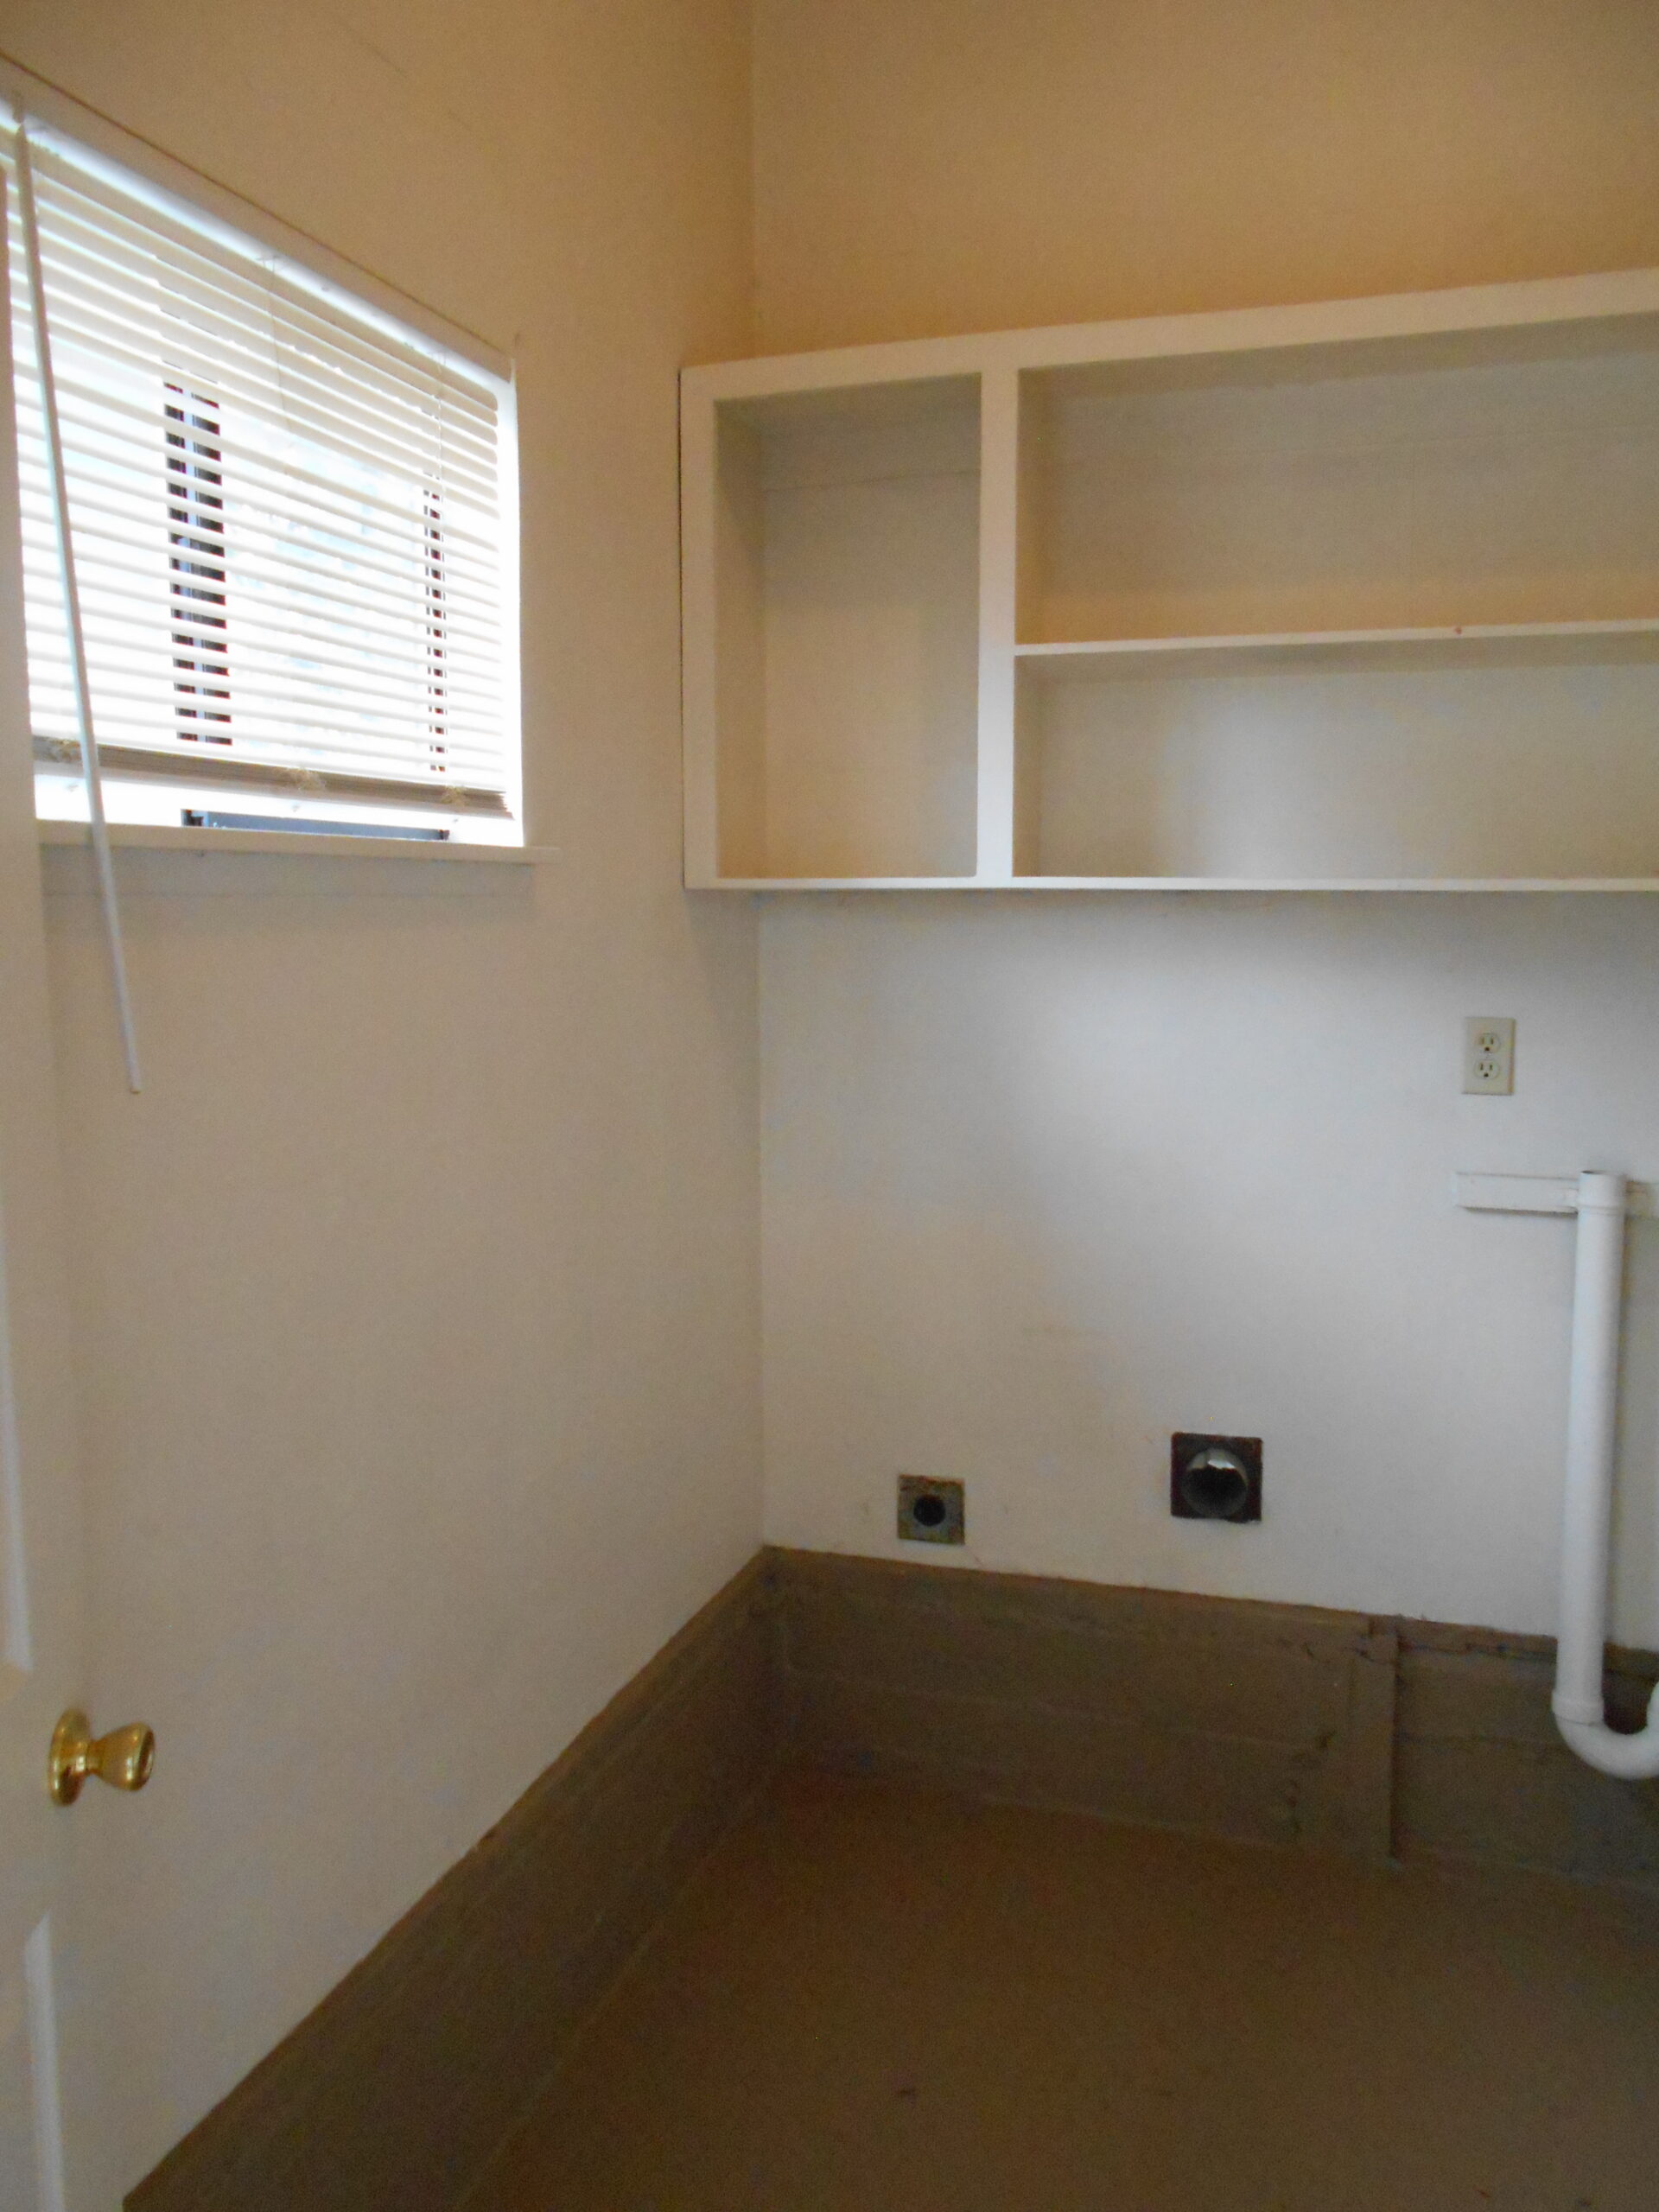 $1,100 – 1 Bedroom Duplex in Tacoma with FREE* APPLICATION FEES!!!